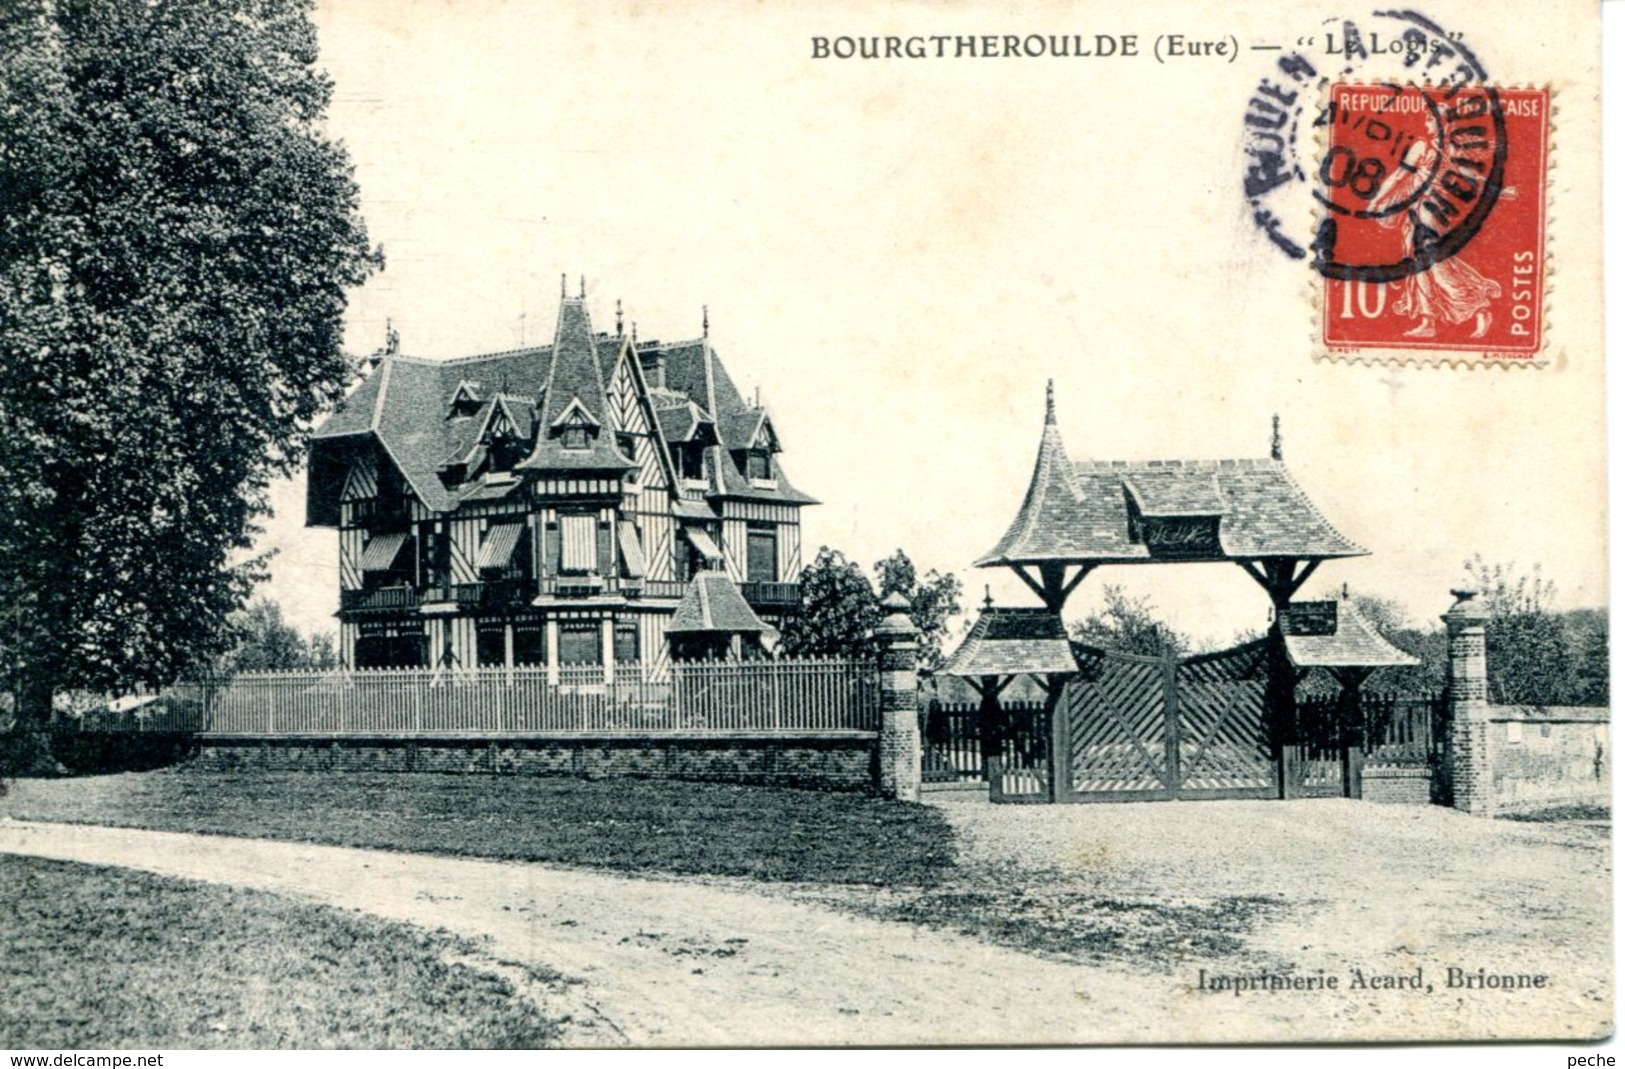 N°2101 A -cpa Bourtheroulde -"le Logis"- - Bourgtheroulde